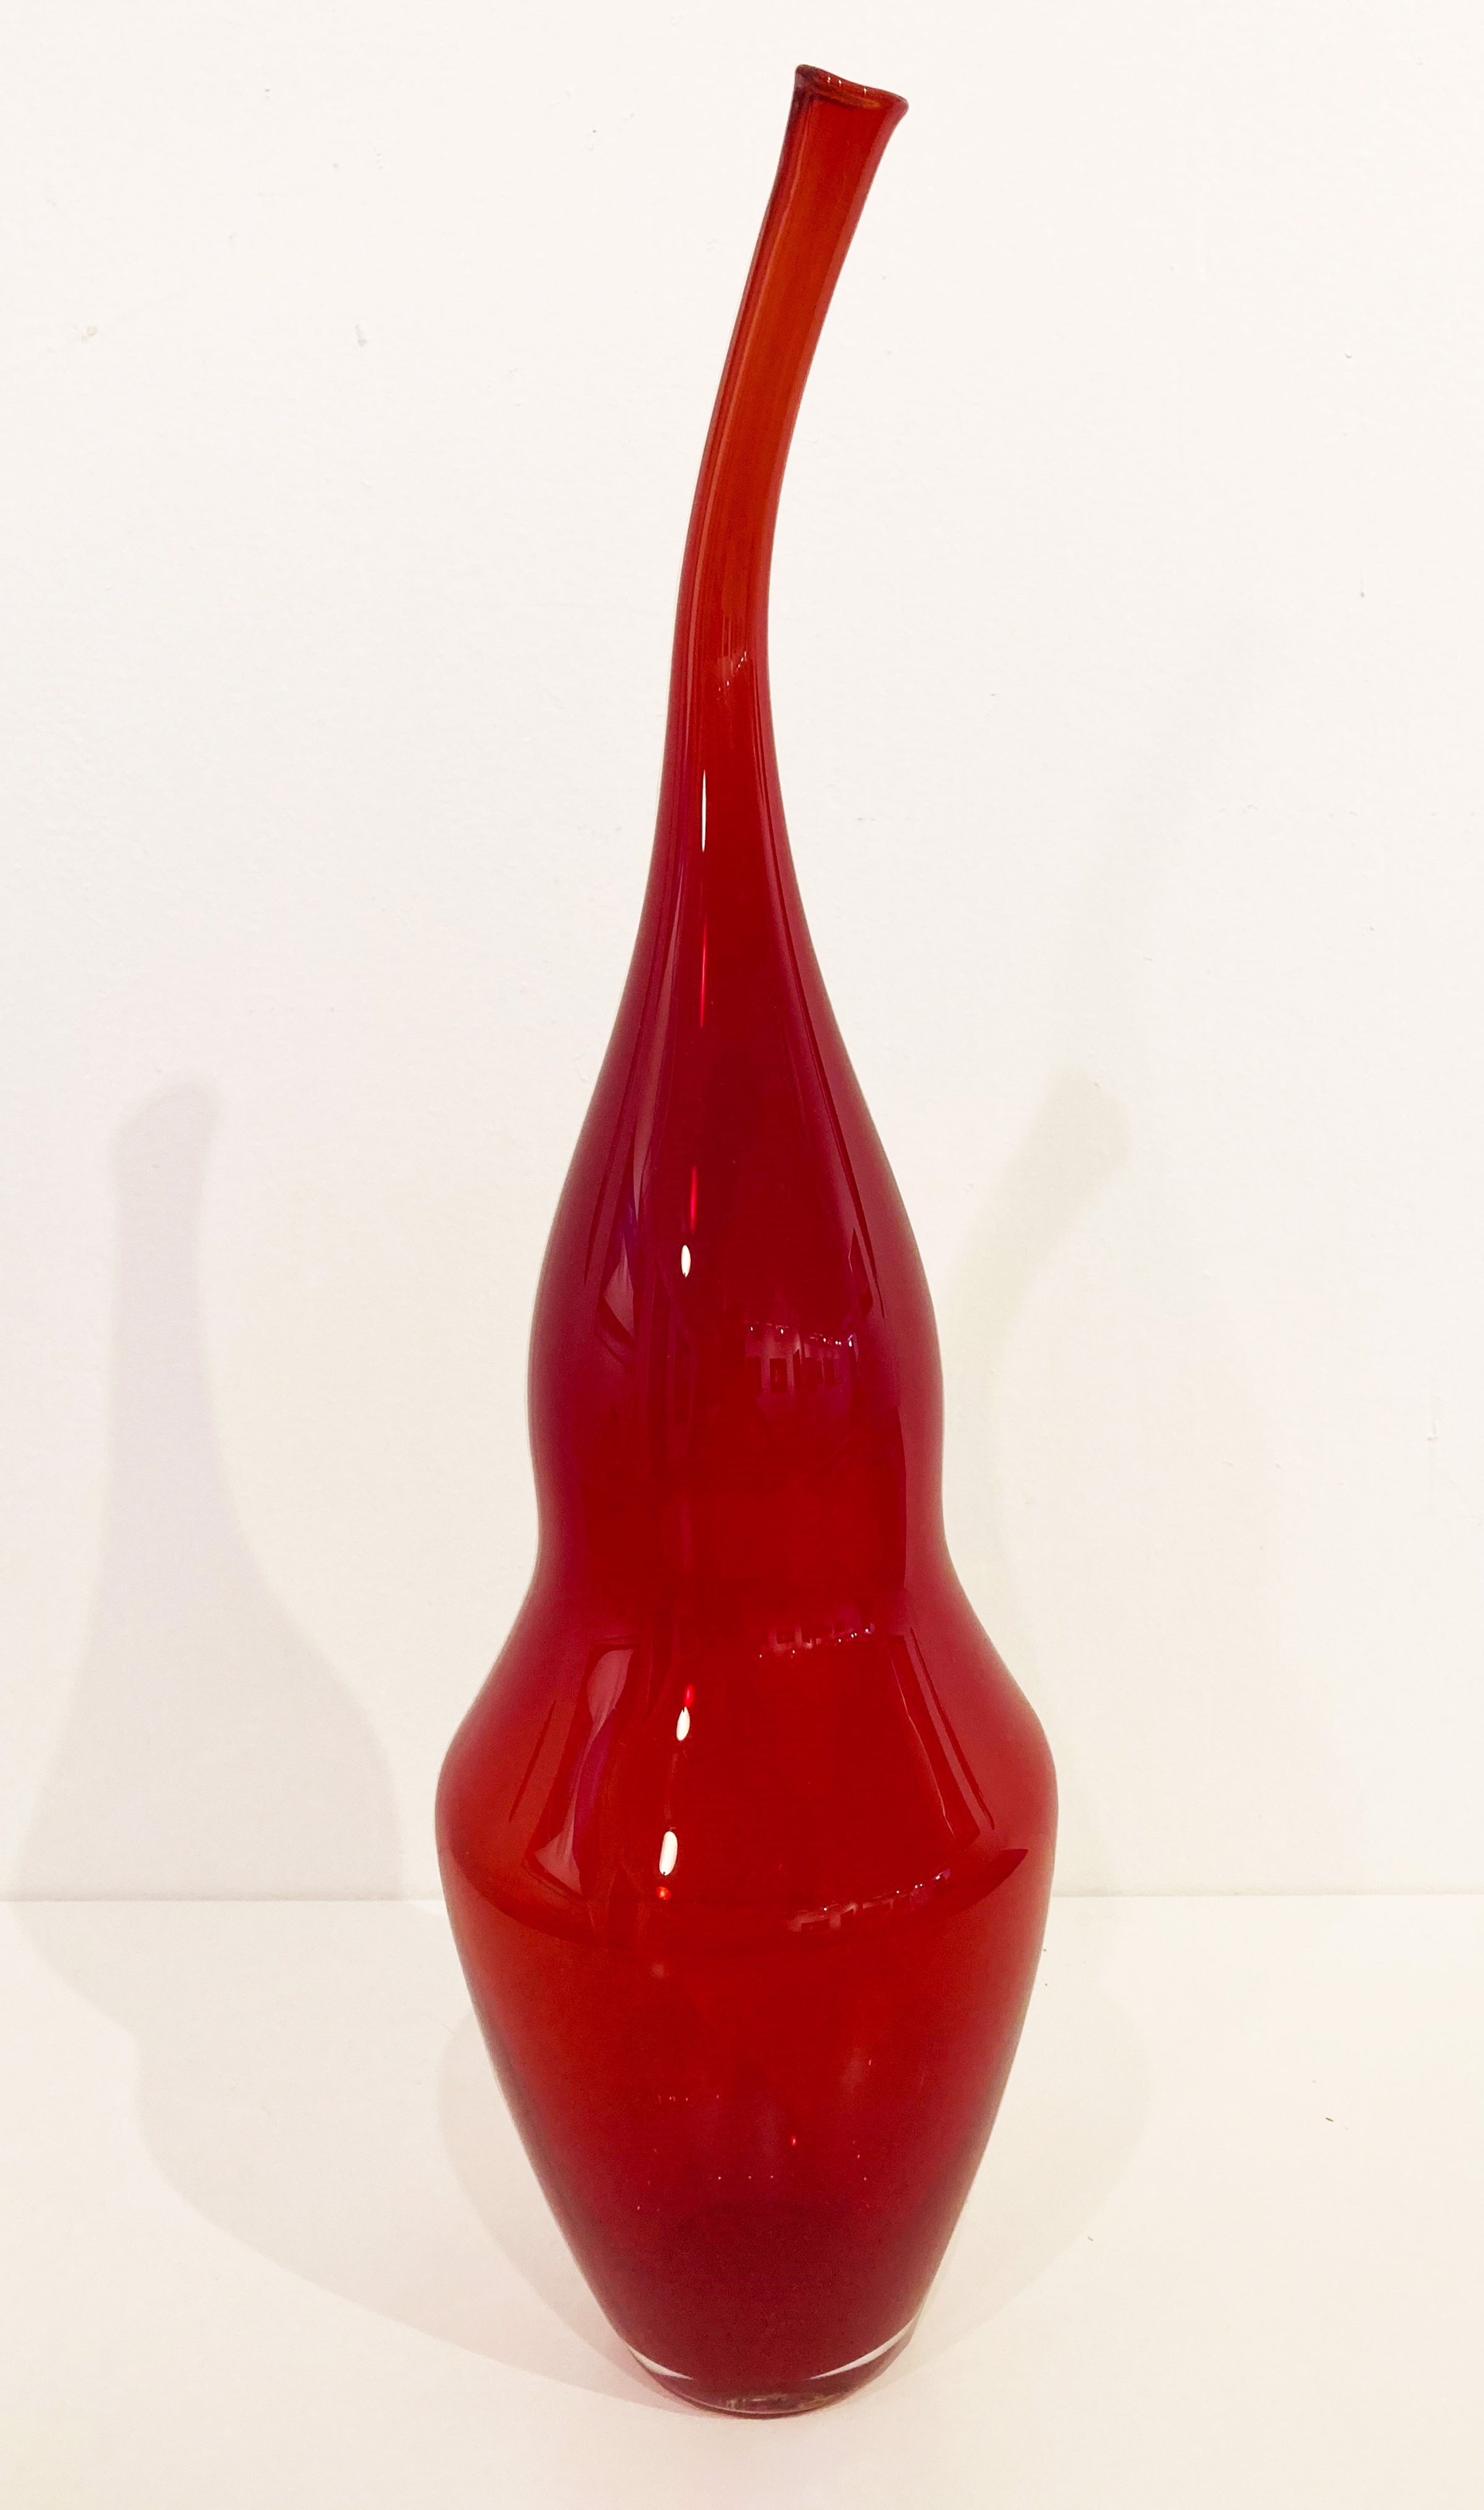 Cherry Red Piccolo Silhouette Bottle by Michael Moran